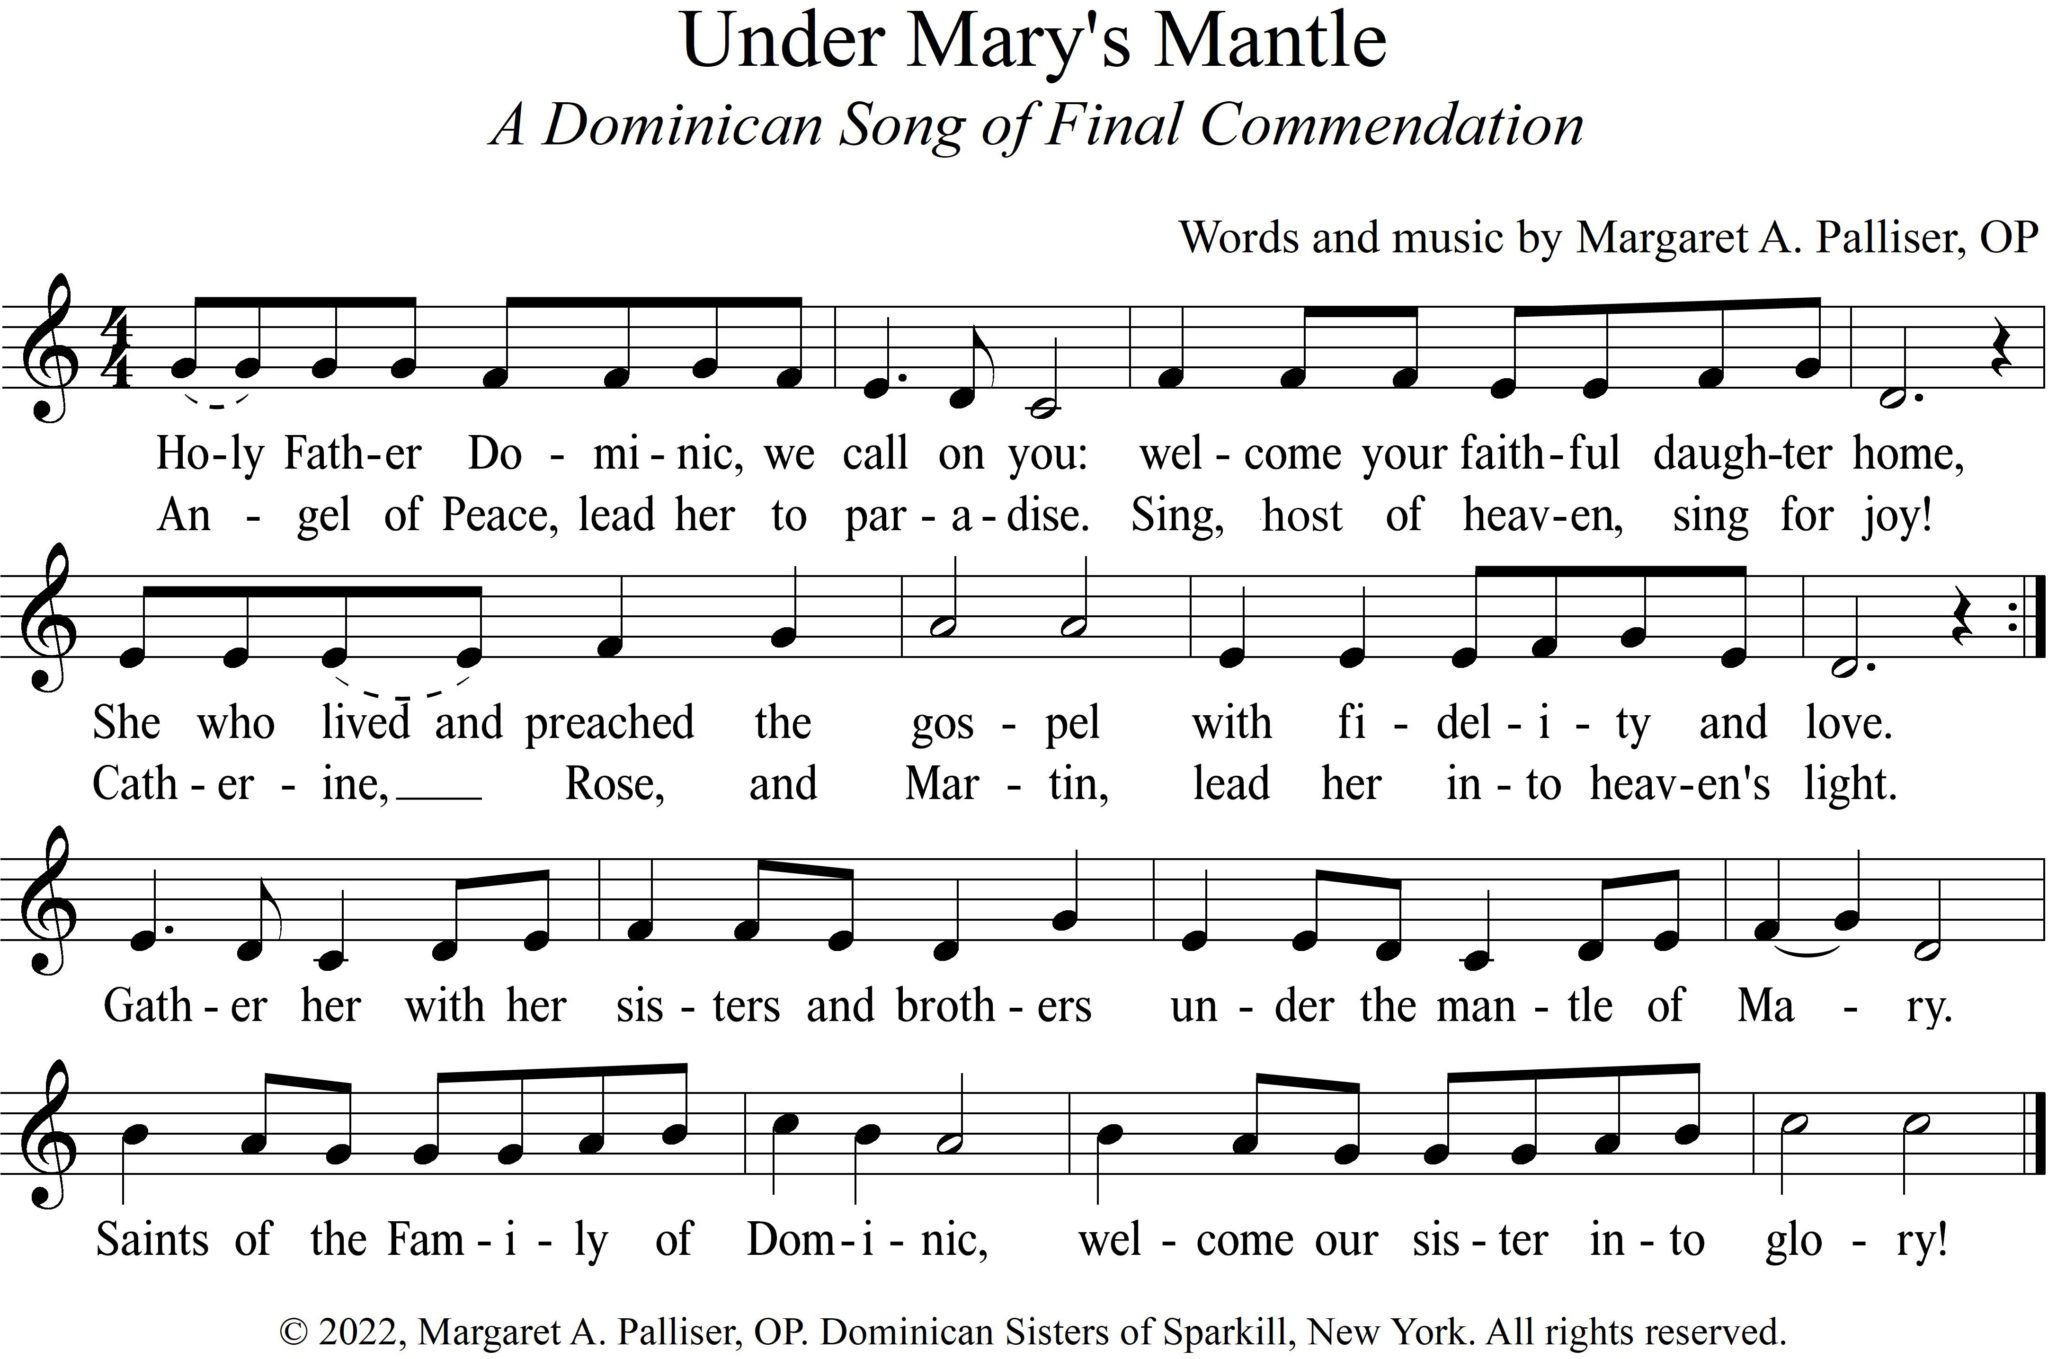 Under Mary's Mantle